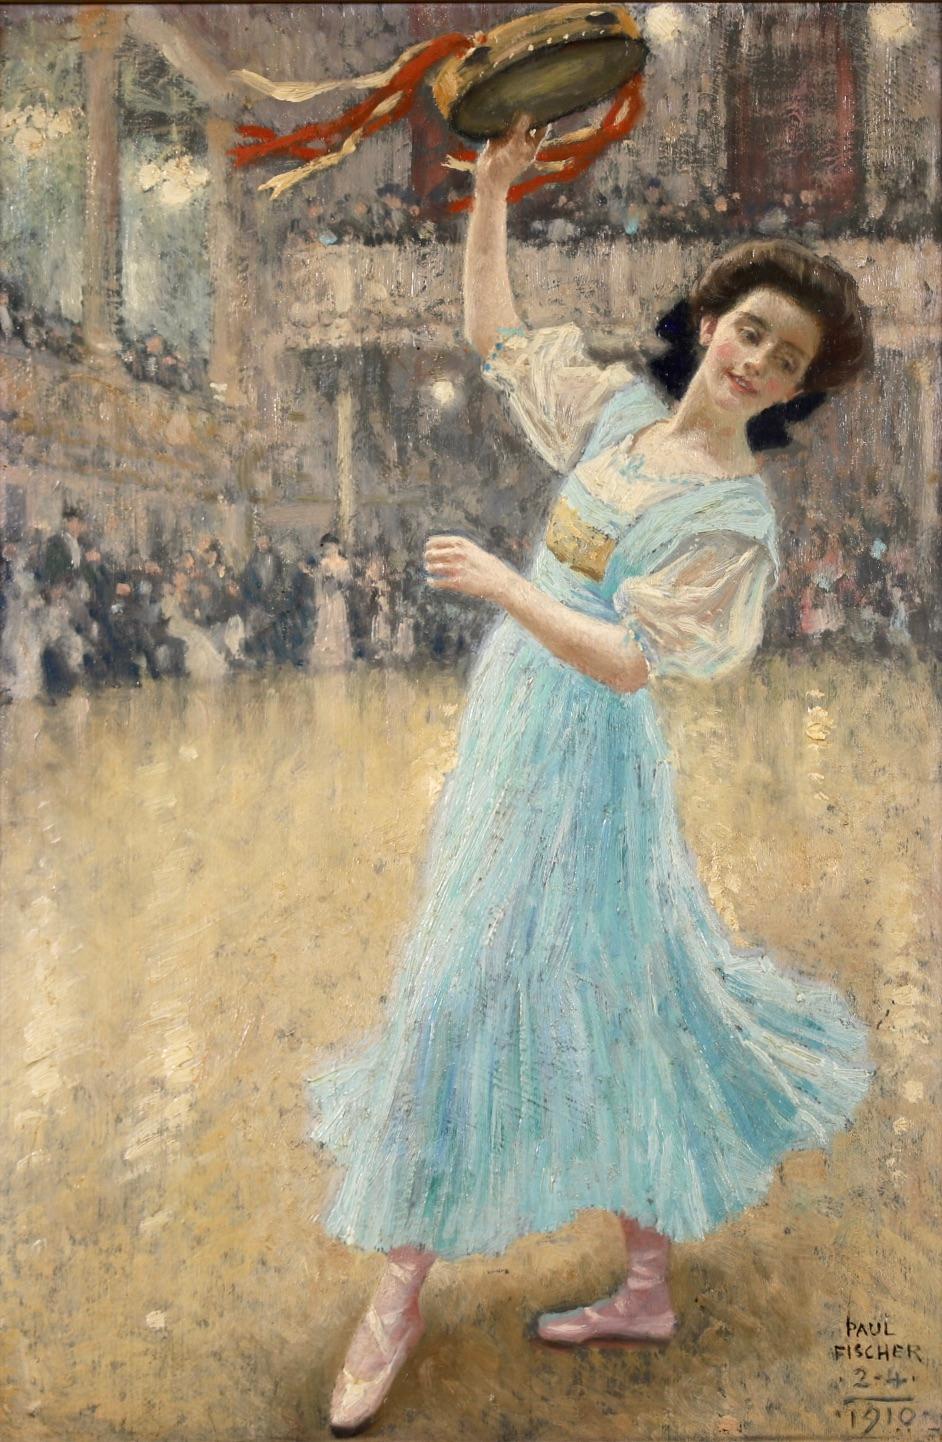 Paul Gustave Fischer Figurative Painting - Showtime! - Realist Oil, Figure Dancing in Interior by Paul Gustav Fischer